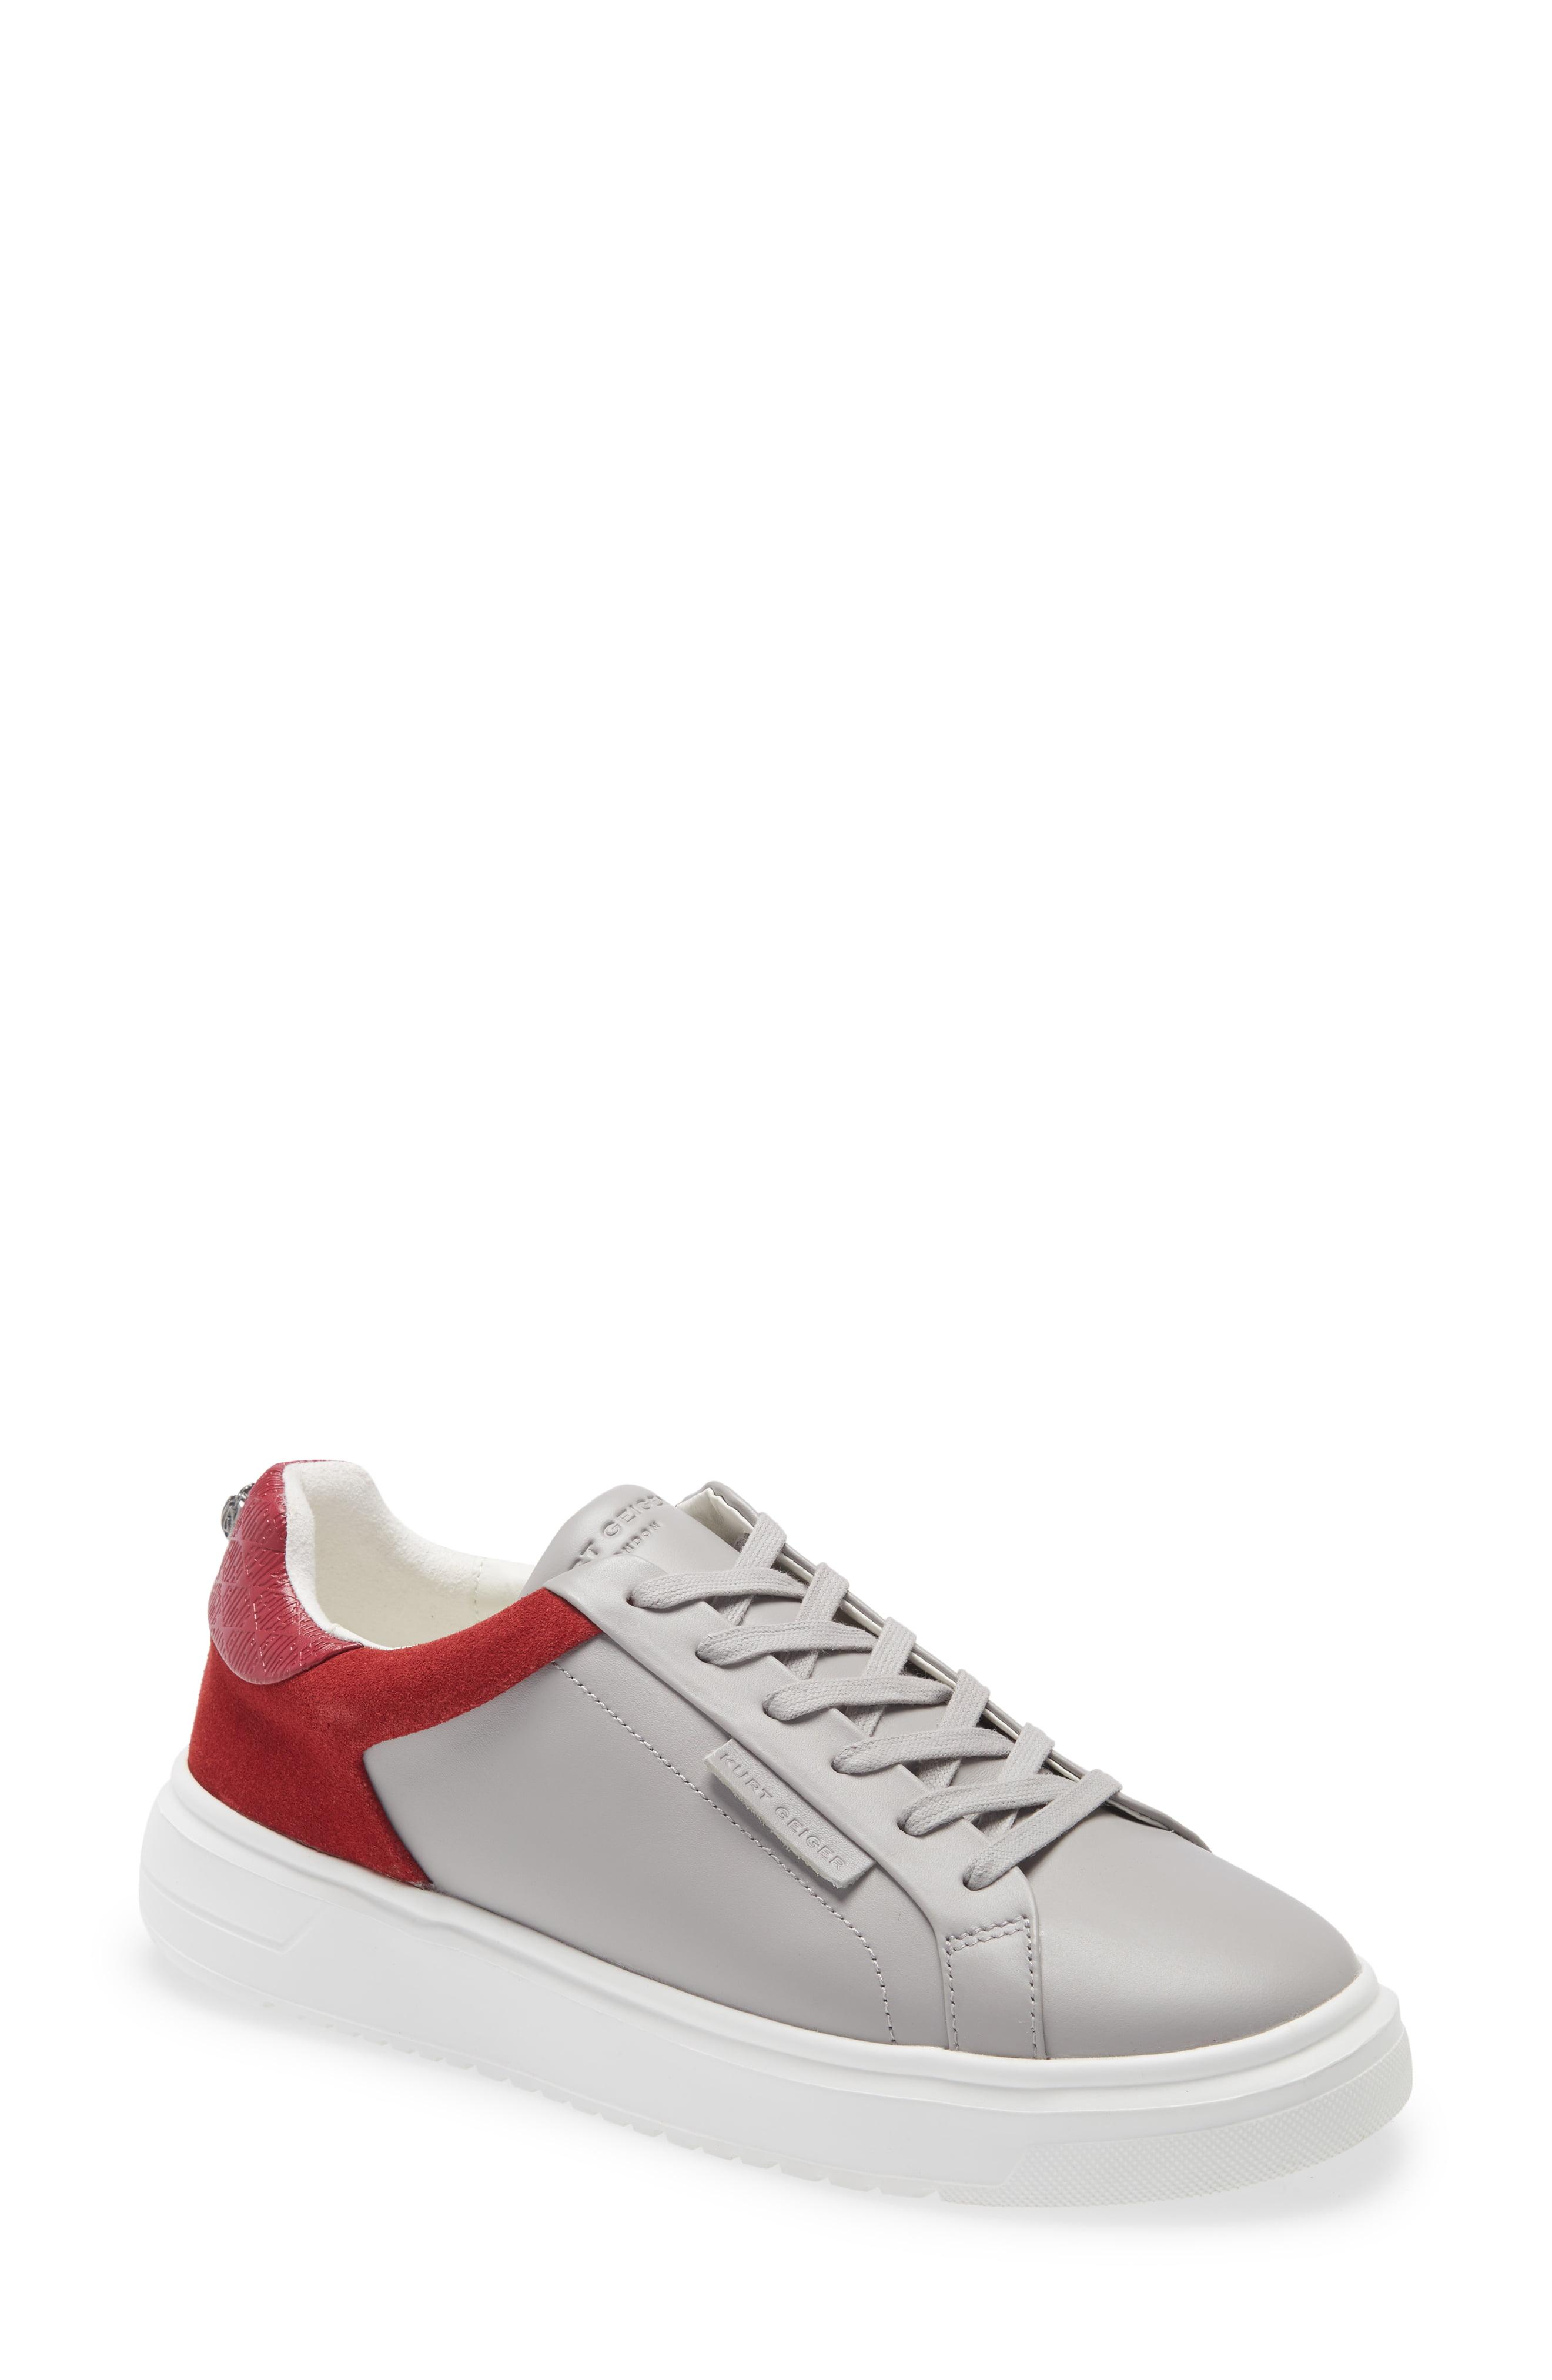 Kurt Geiger Leather Noah Eagle Mix Low Top Sneaker in Grey Leather ...